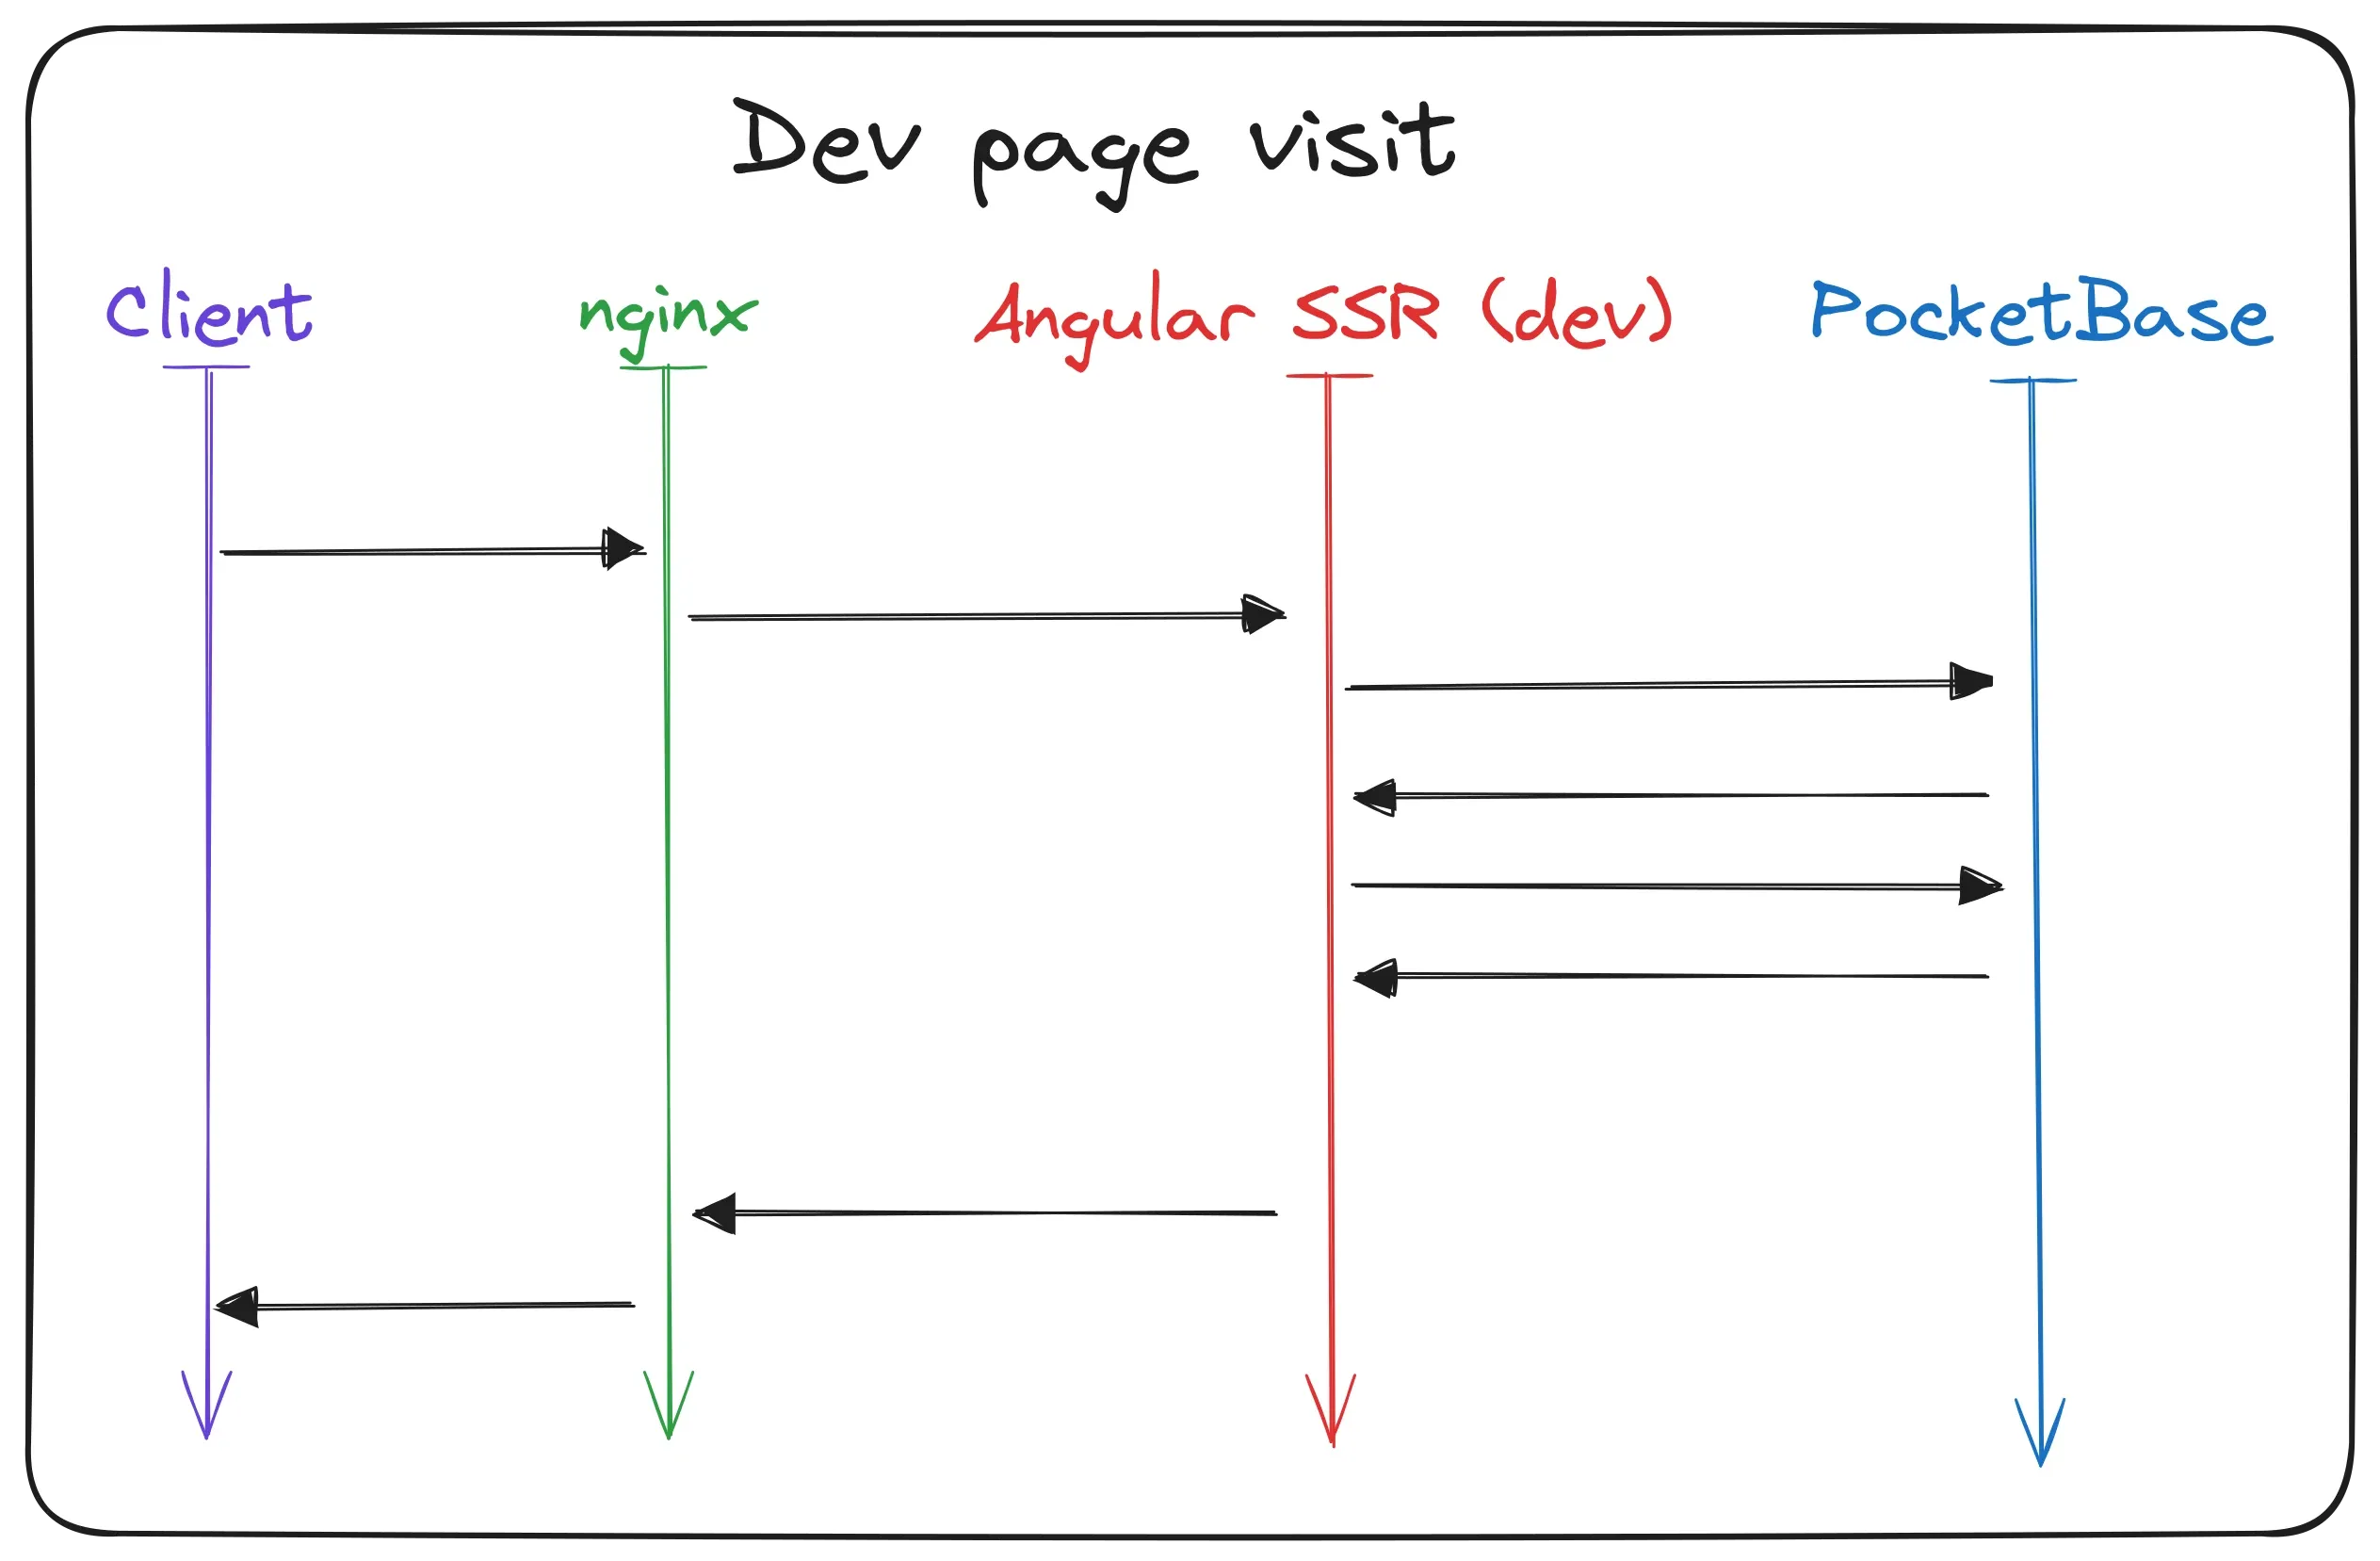 Traffic flow when an author visits the development instance